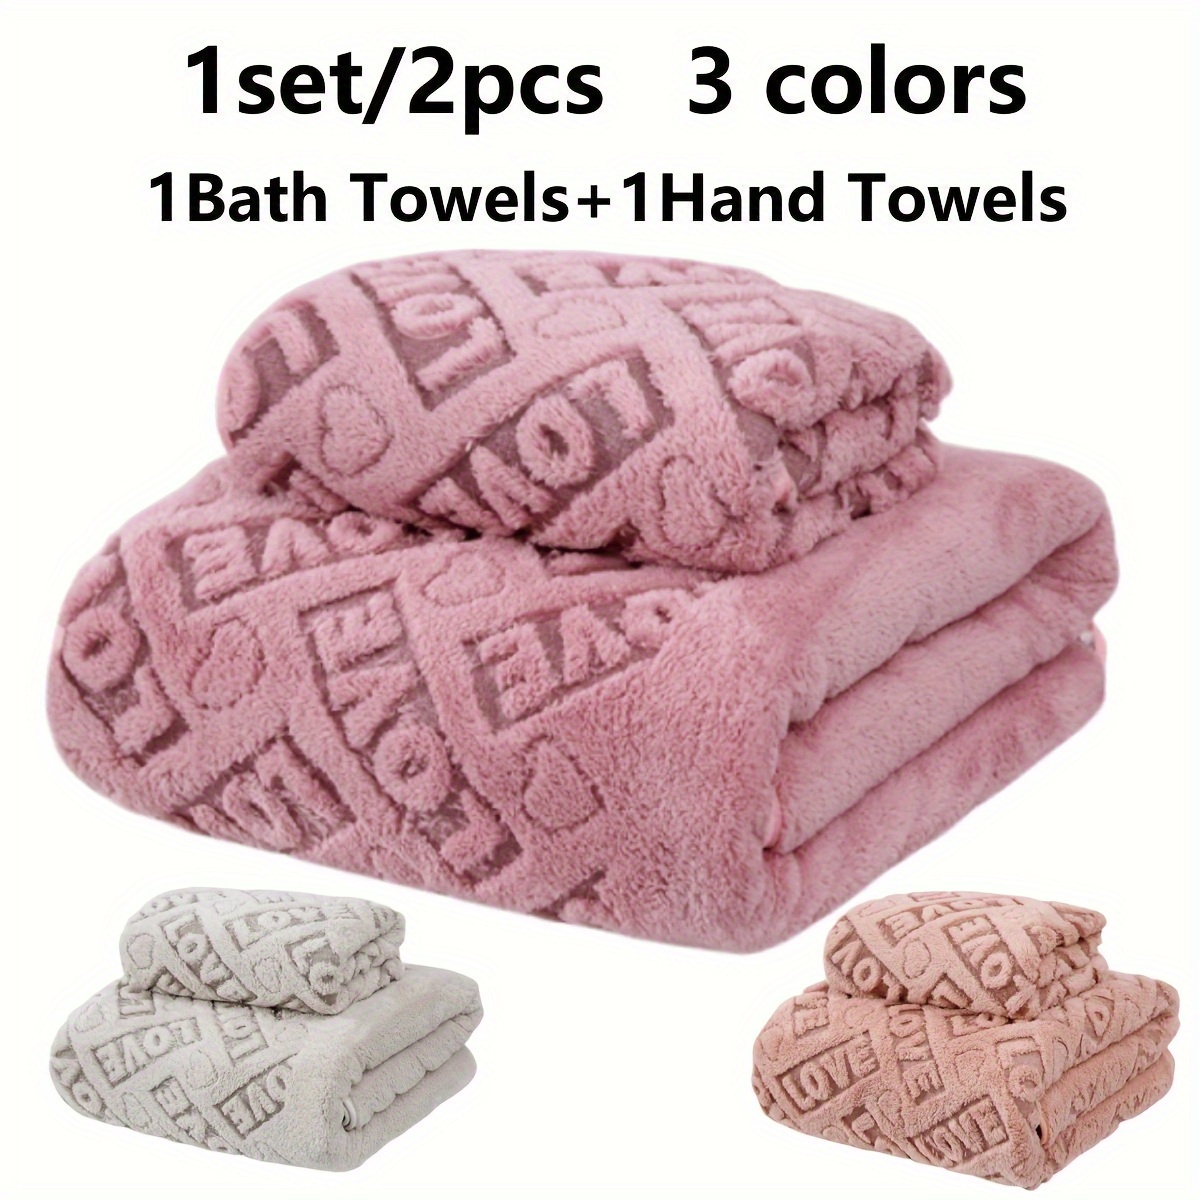 

2pcs Love Textured Bath Linen Set, Thickened Absorbent Face Towel, Soft And Skin-friendly Shower Towel - 1 Bath Towel + 1 Hand Towel, Bathroom Supplies, Home Supplies